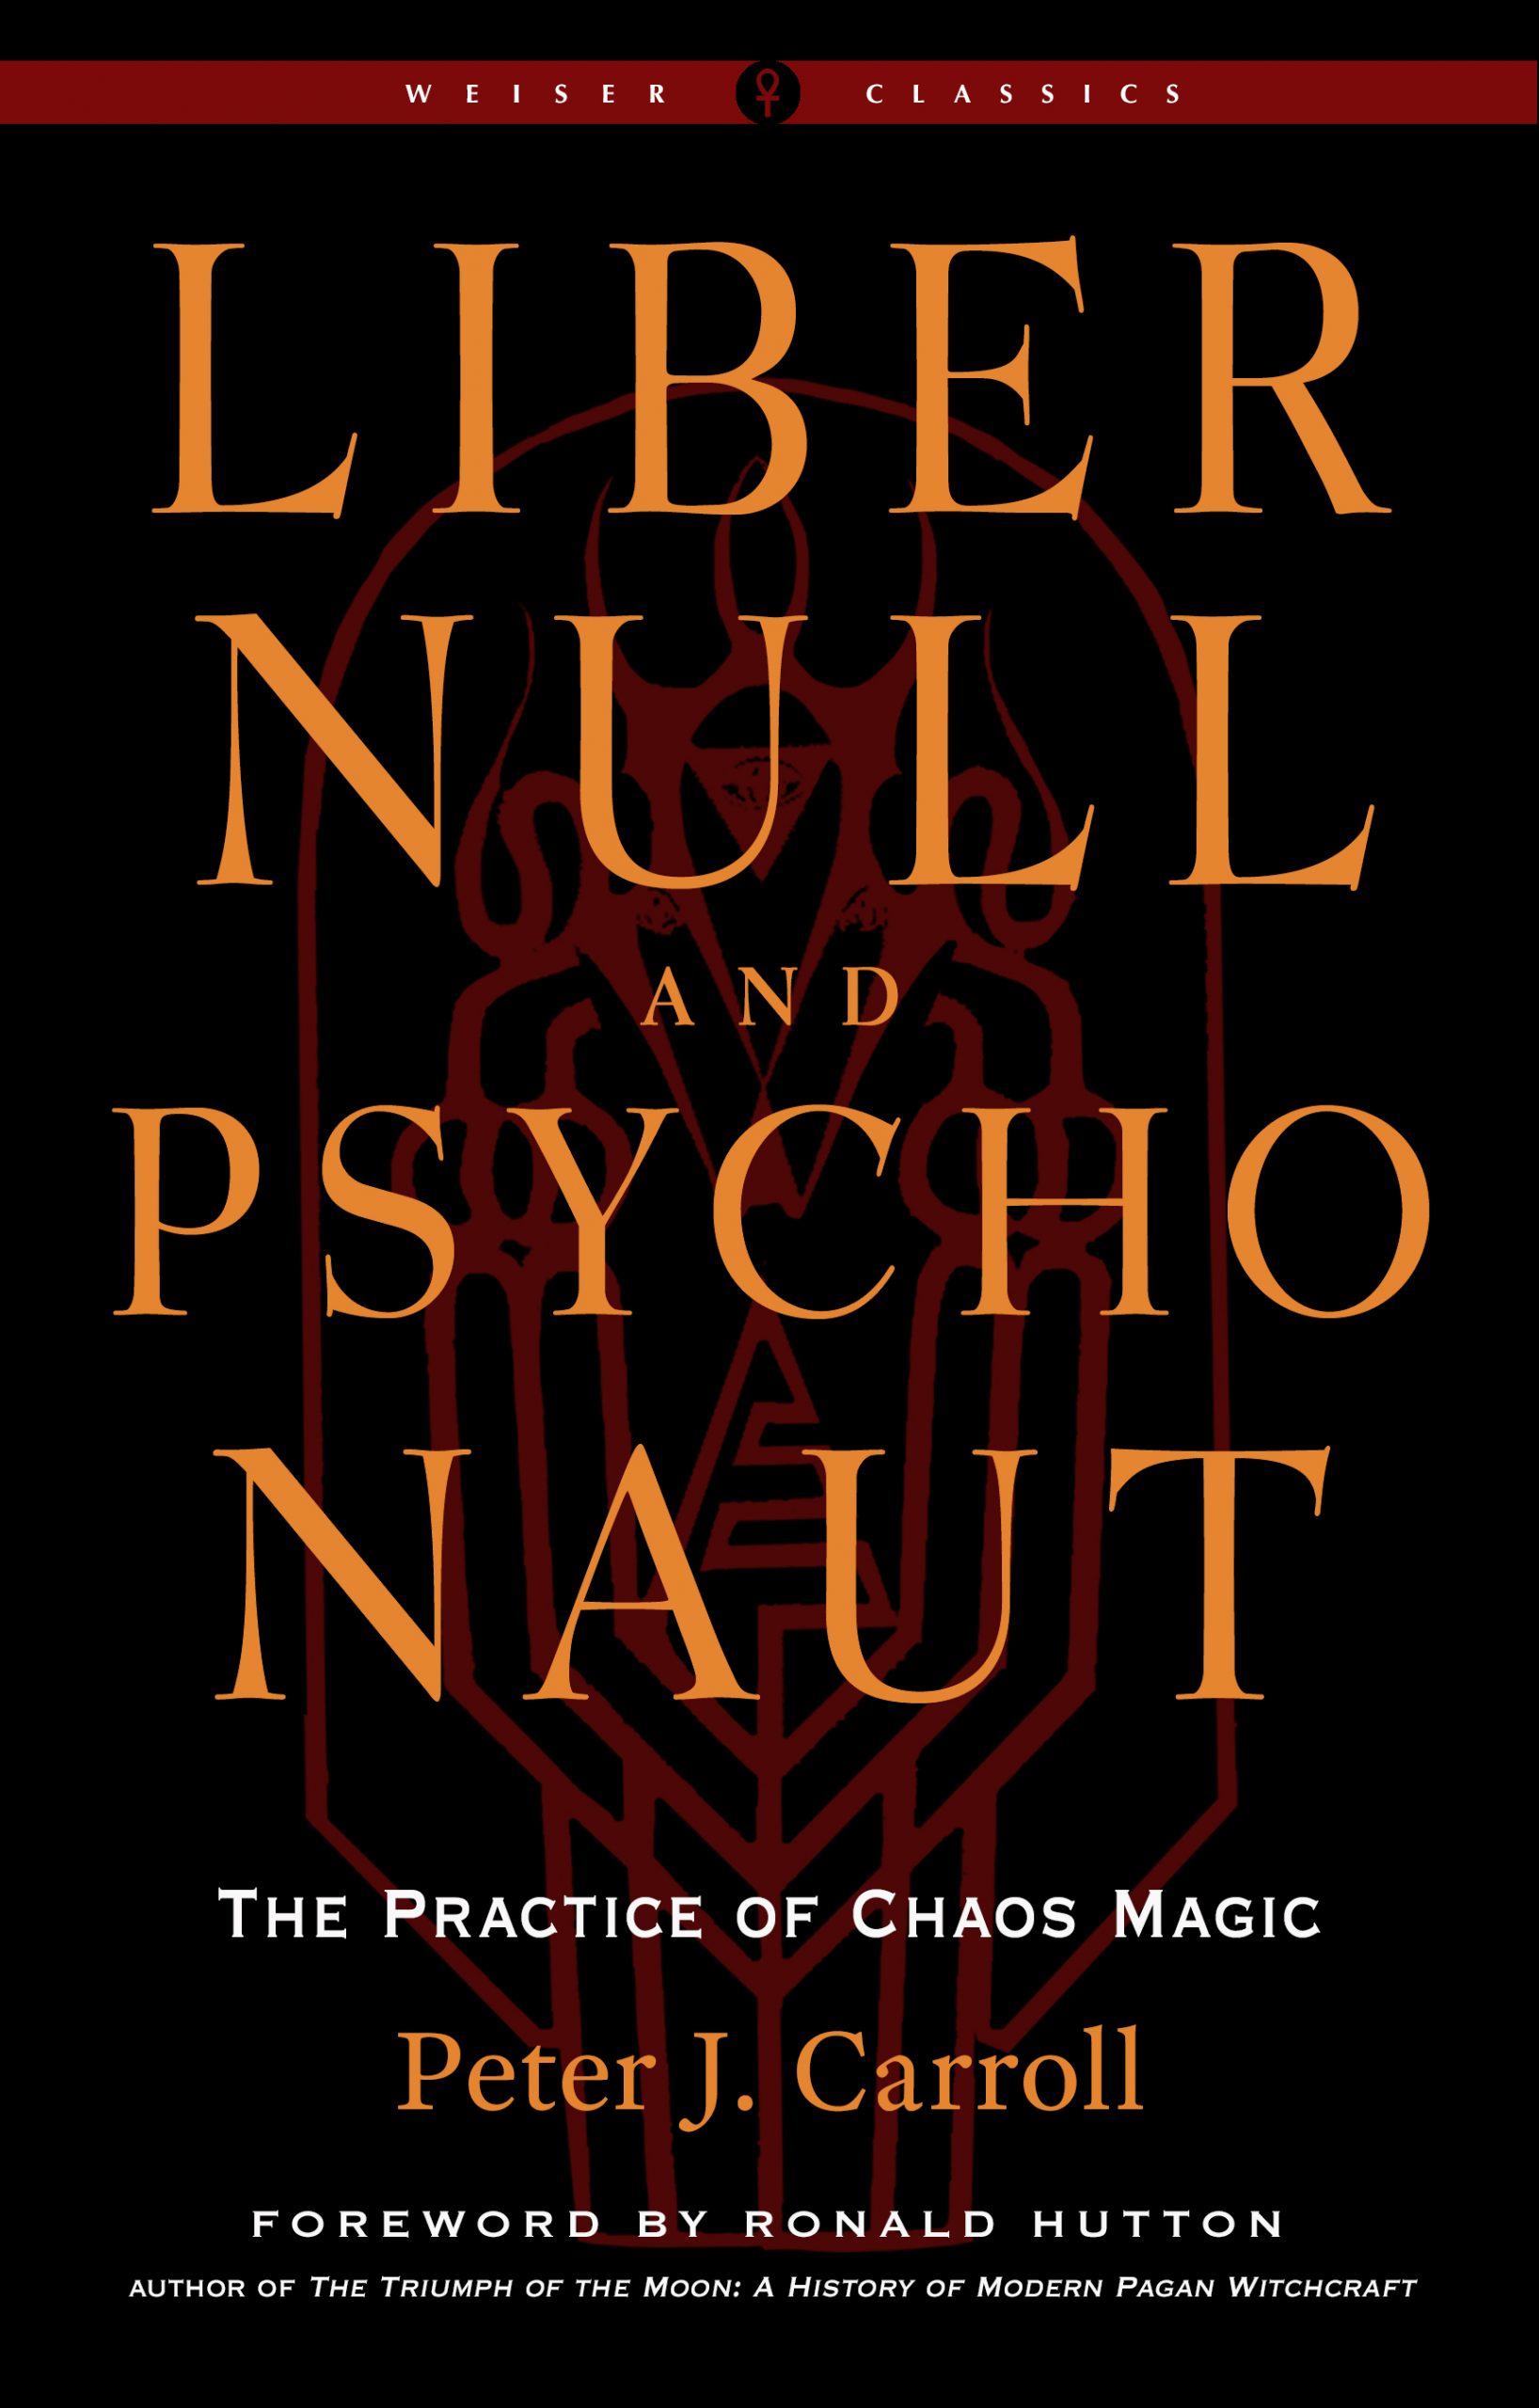 Liber Null and Psychonaut